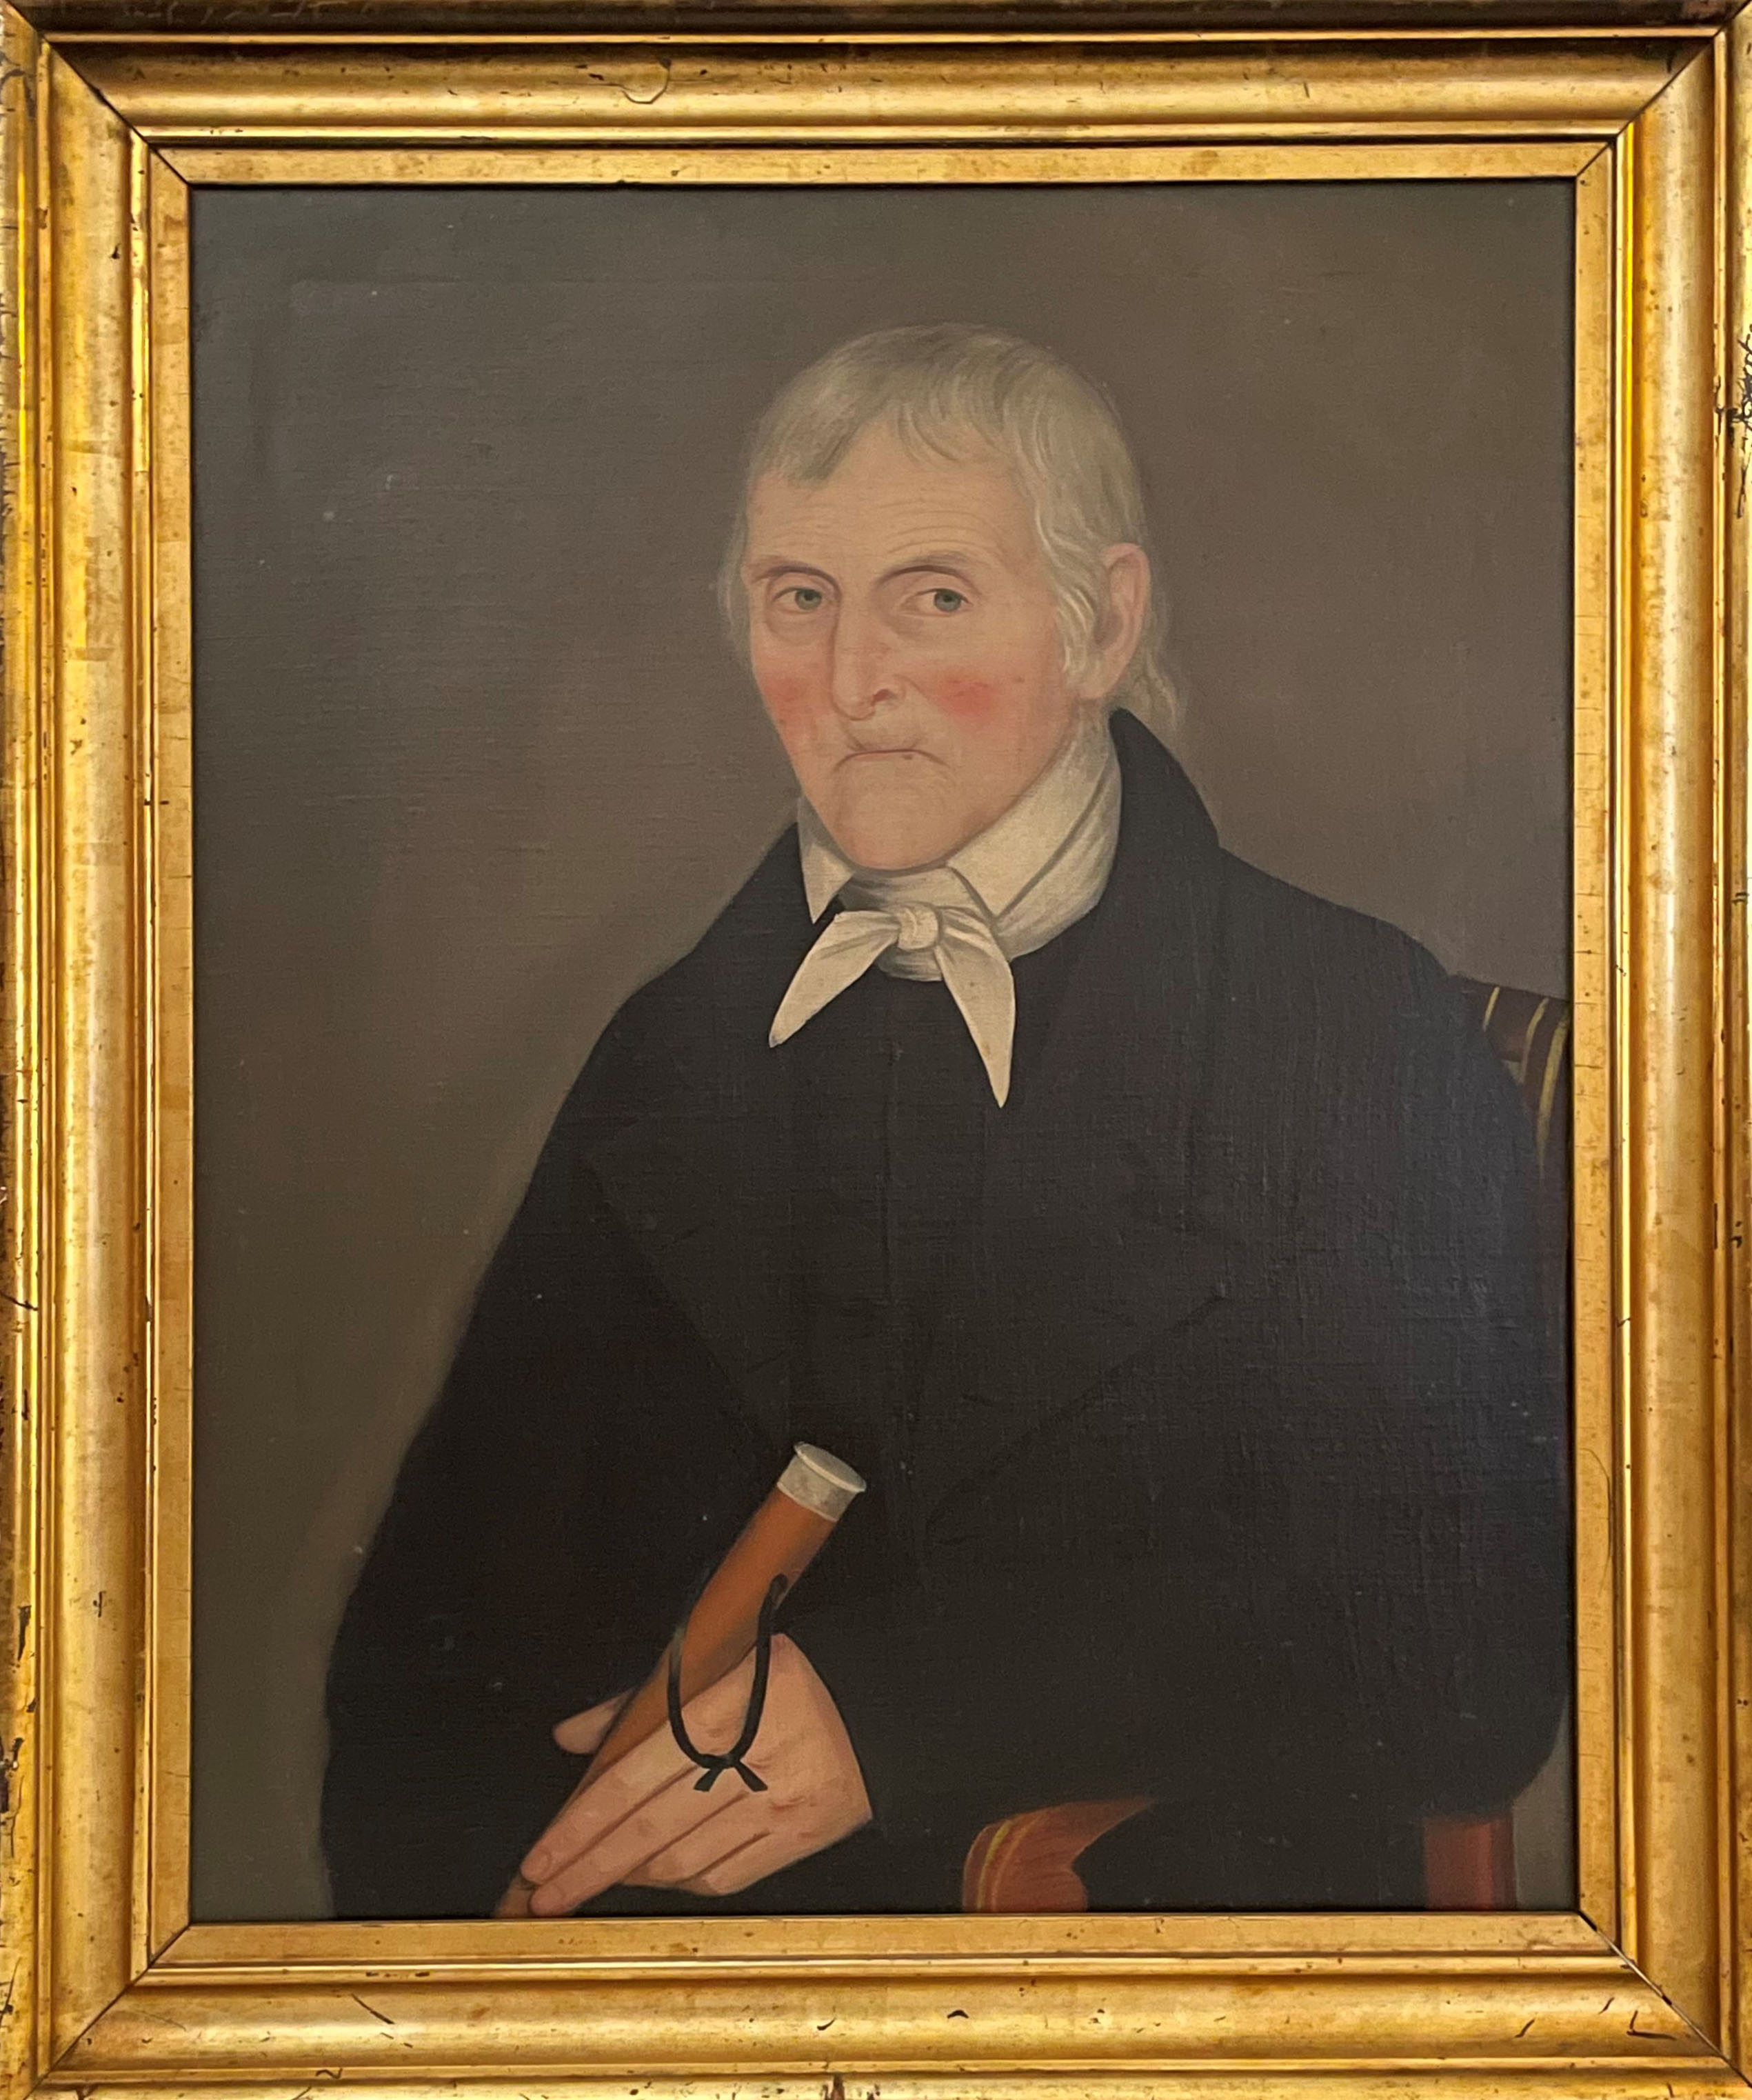 Portrait of Dirck D. Wynkoop, painted circa 1821 by Ammi Phillips. Historic Huguenot Street Permanent Collection, gift of Marie J. Wiersum. Courtesy of Historic Huguenot Street